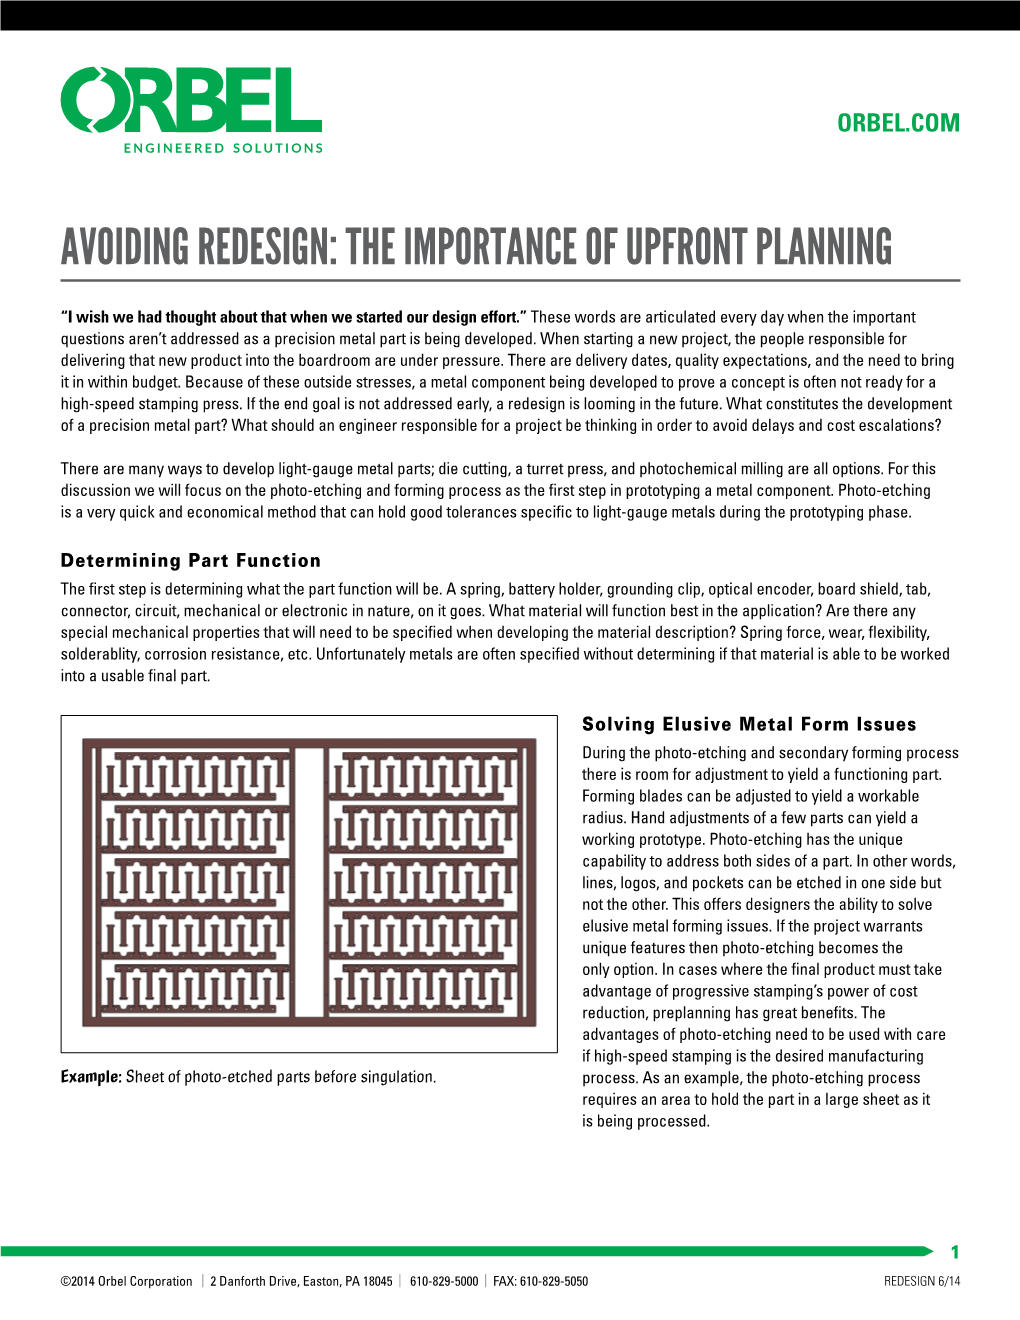 Avoiding Redesign: the Importance of Upfront Planning